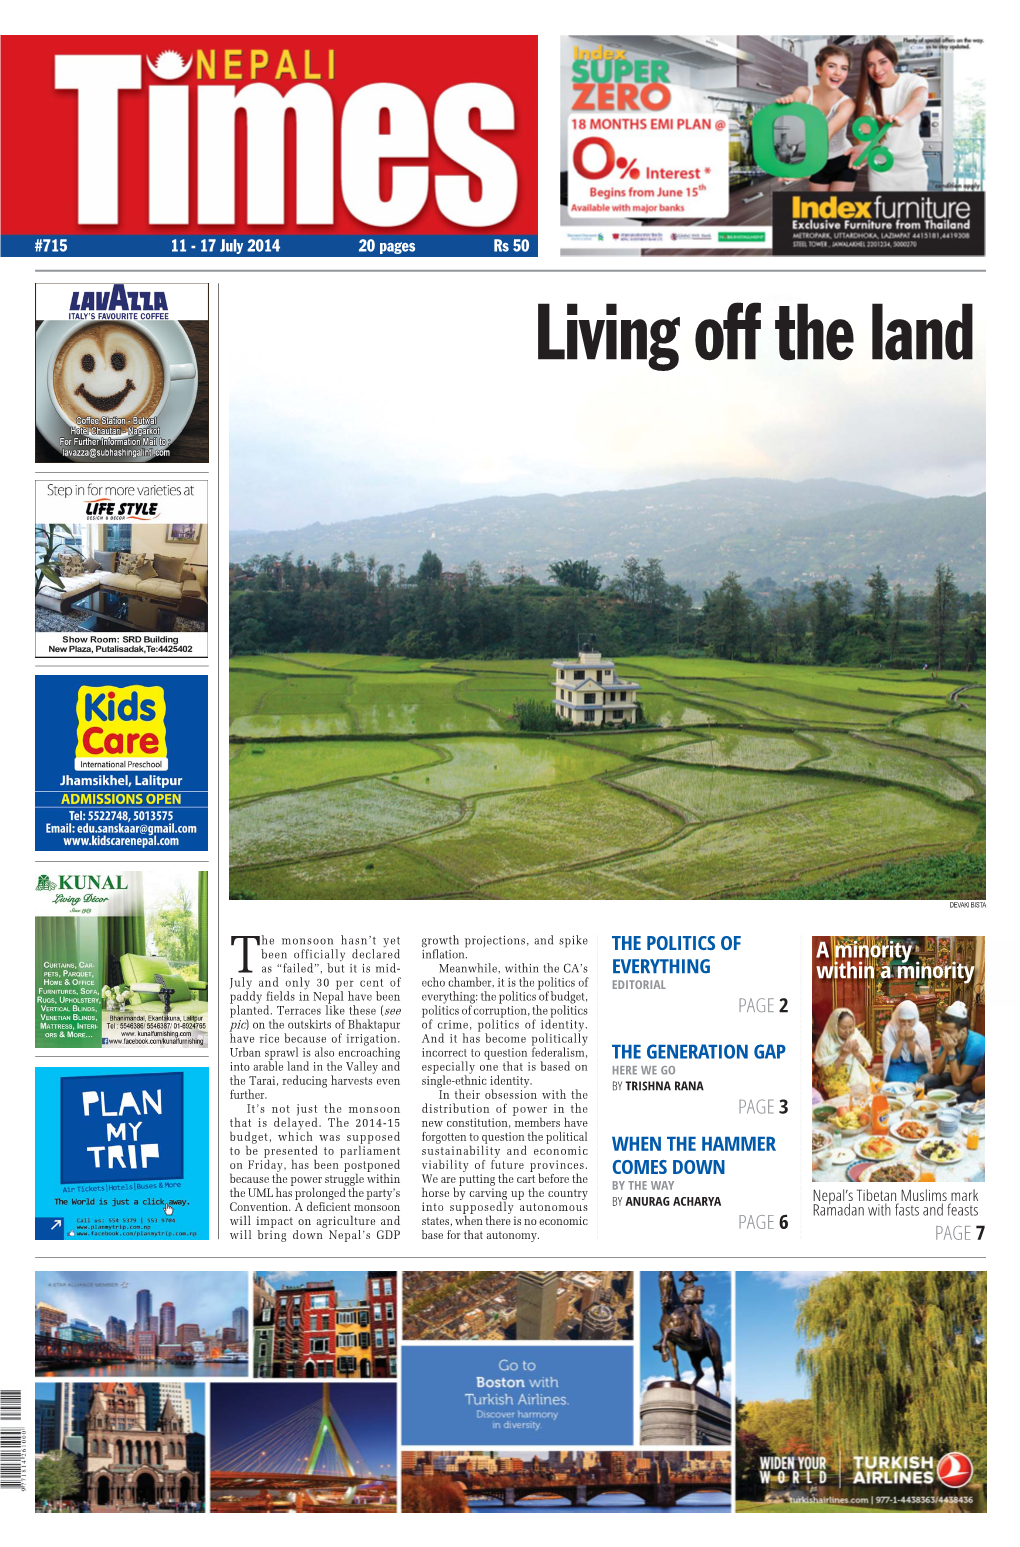 715 11 - 17 July 2014 20 Pages Rs 50 Living Off the Land